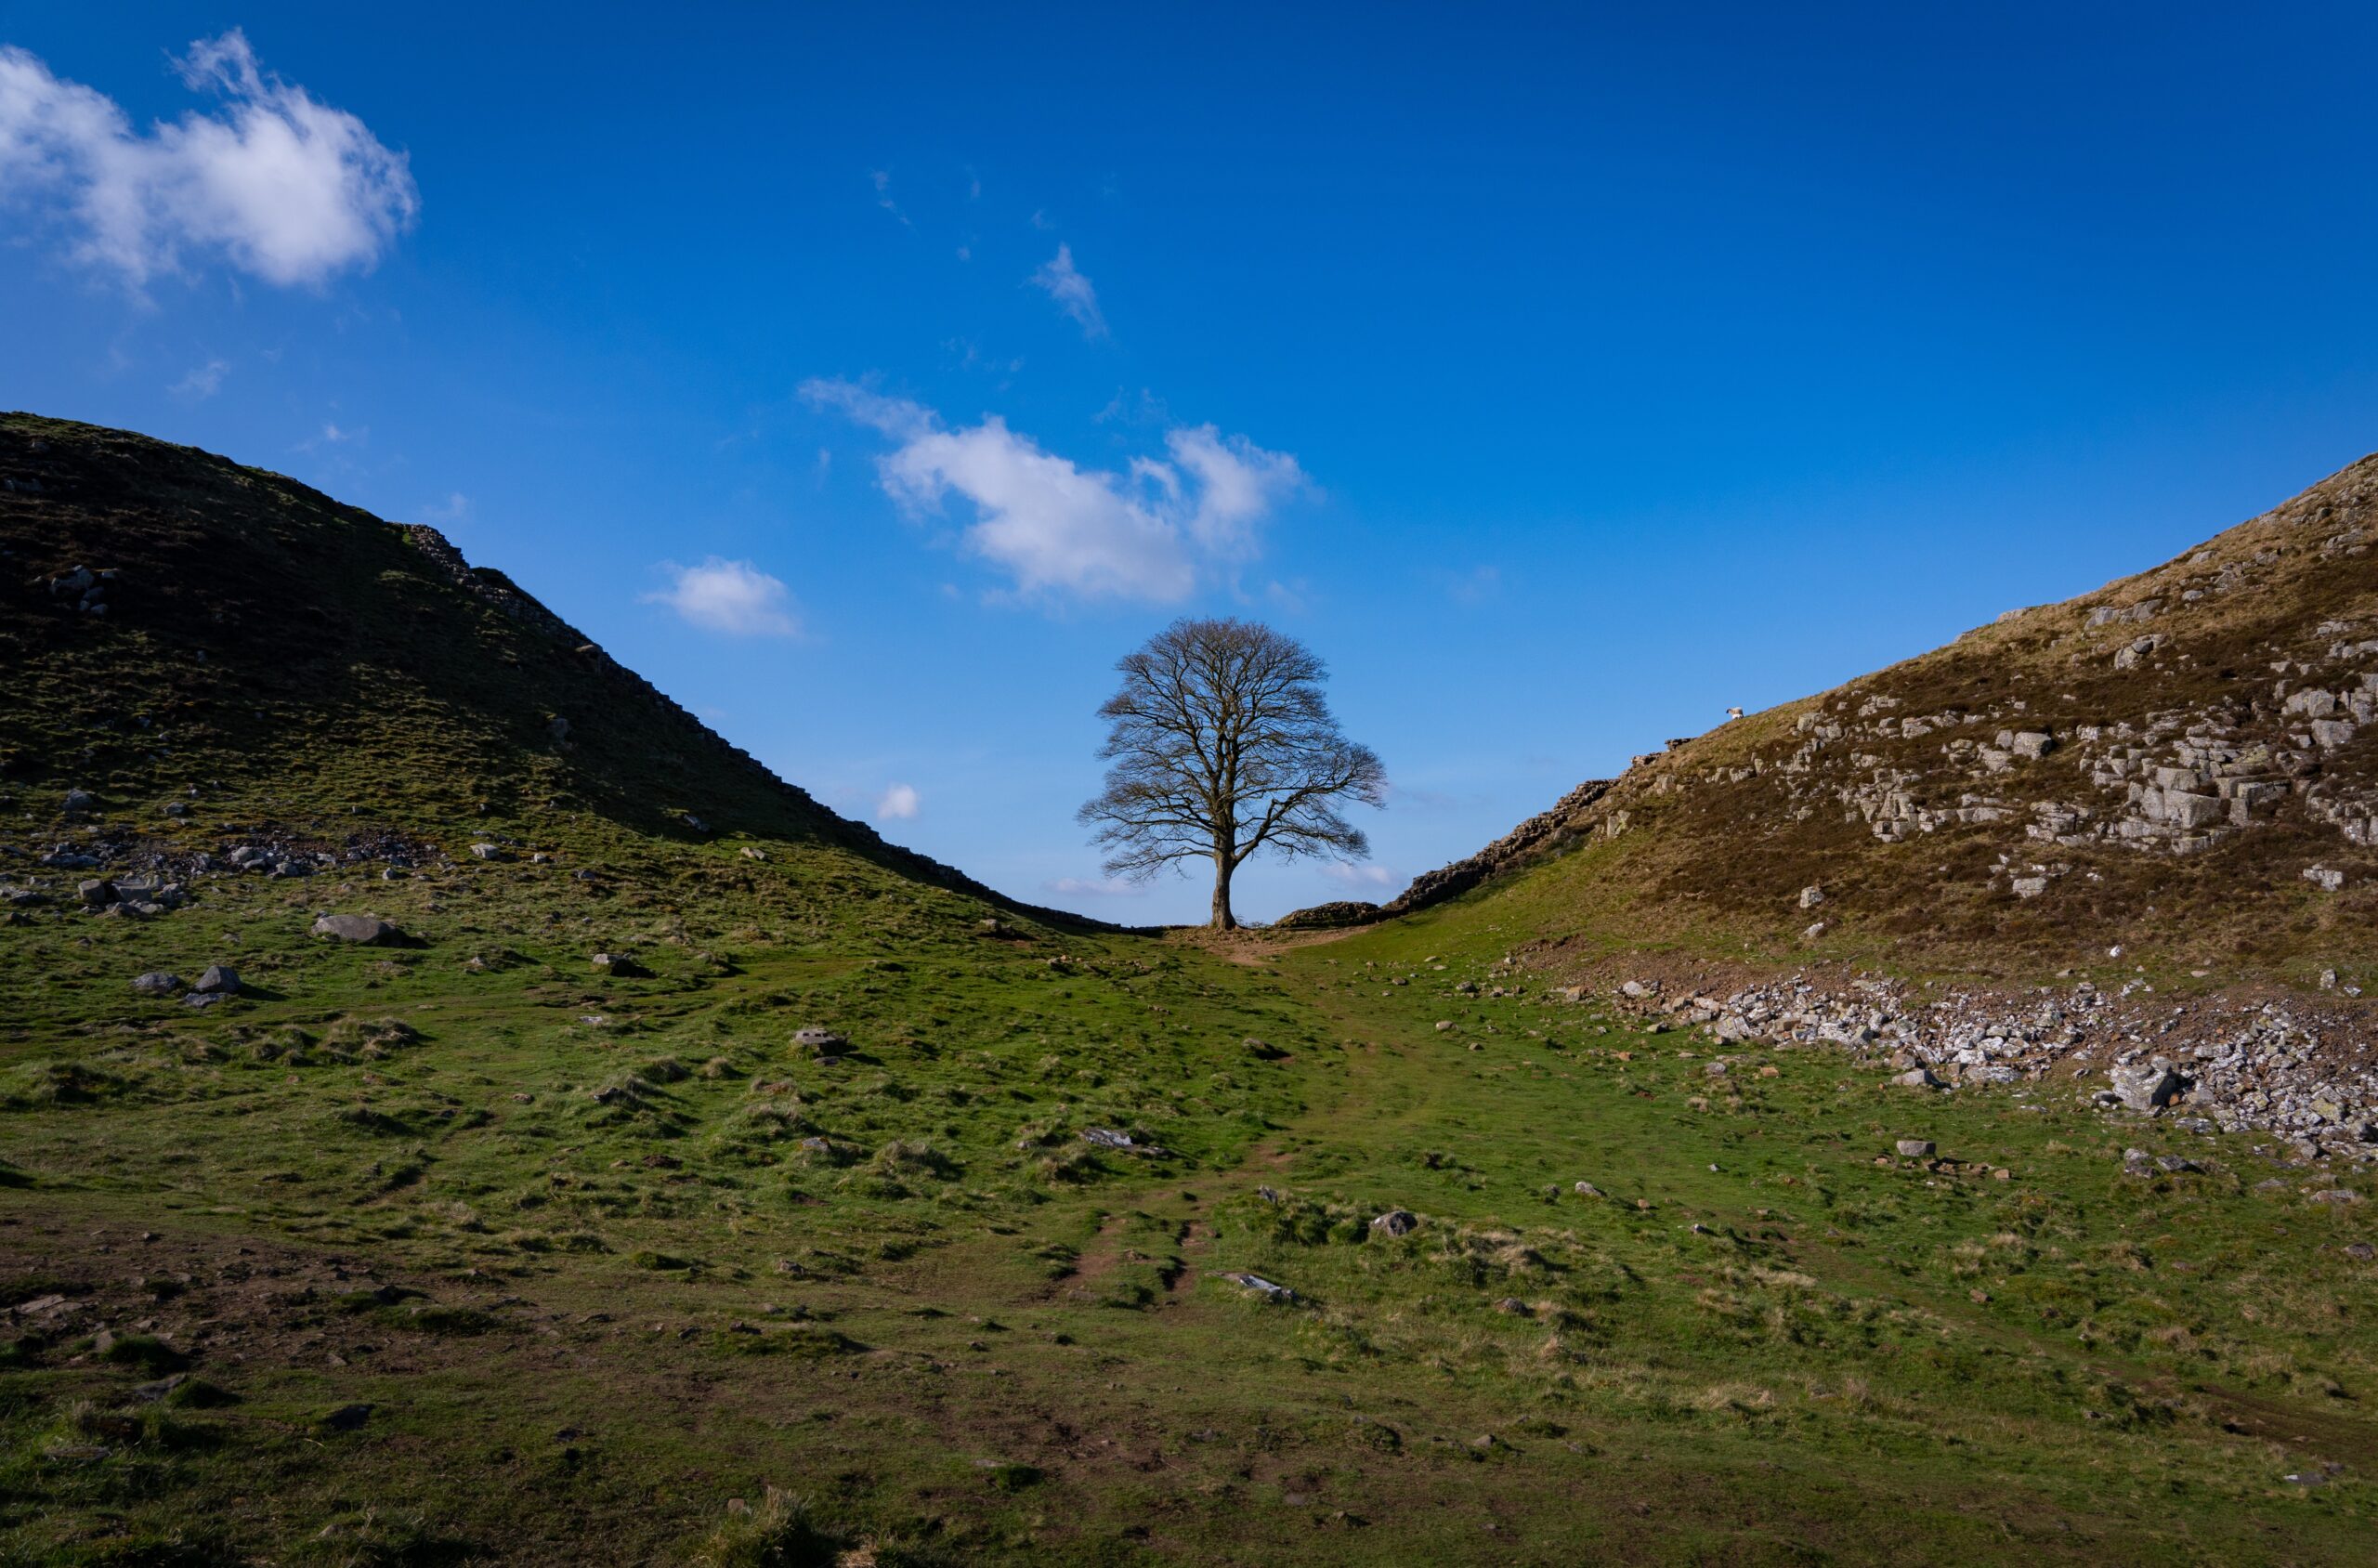 The Sycamore Gap tree has been renamed 'The Sycamore Stump' after it was felled in an act of vandalism